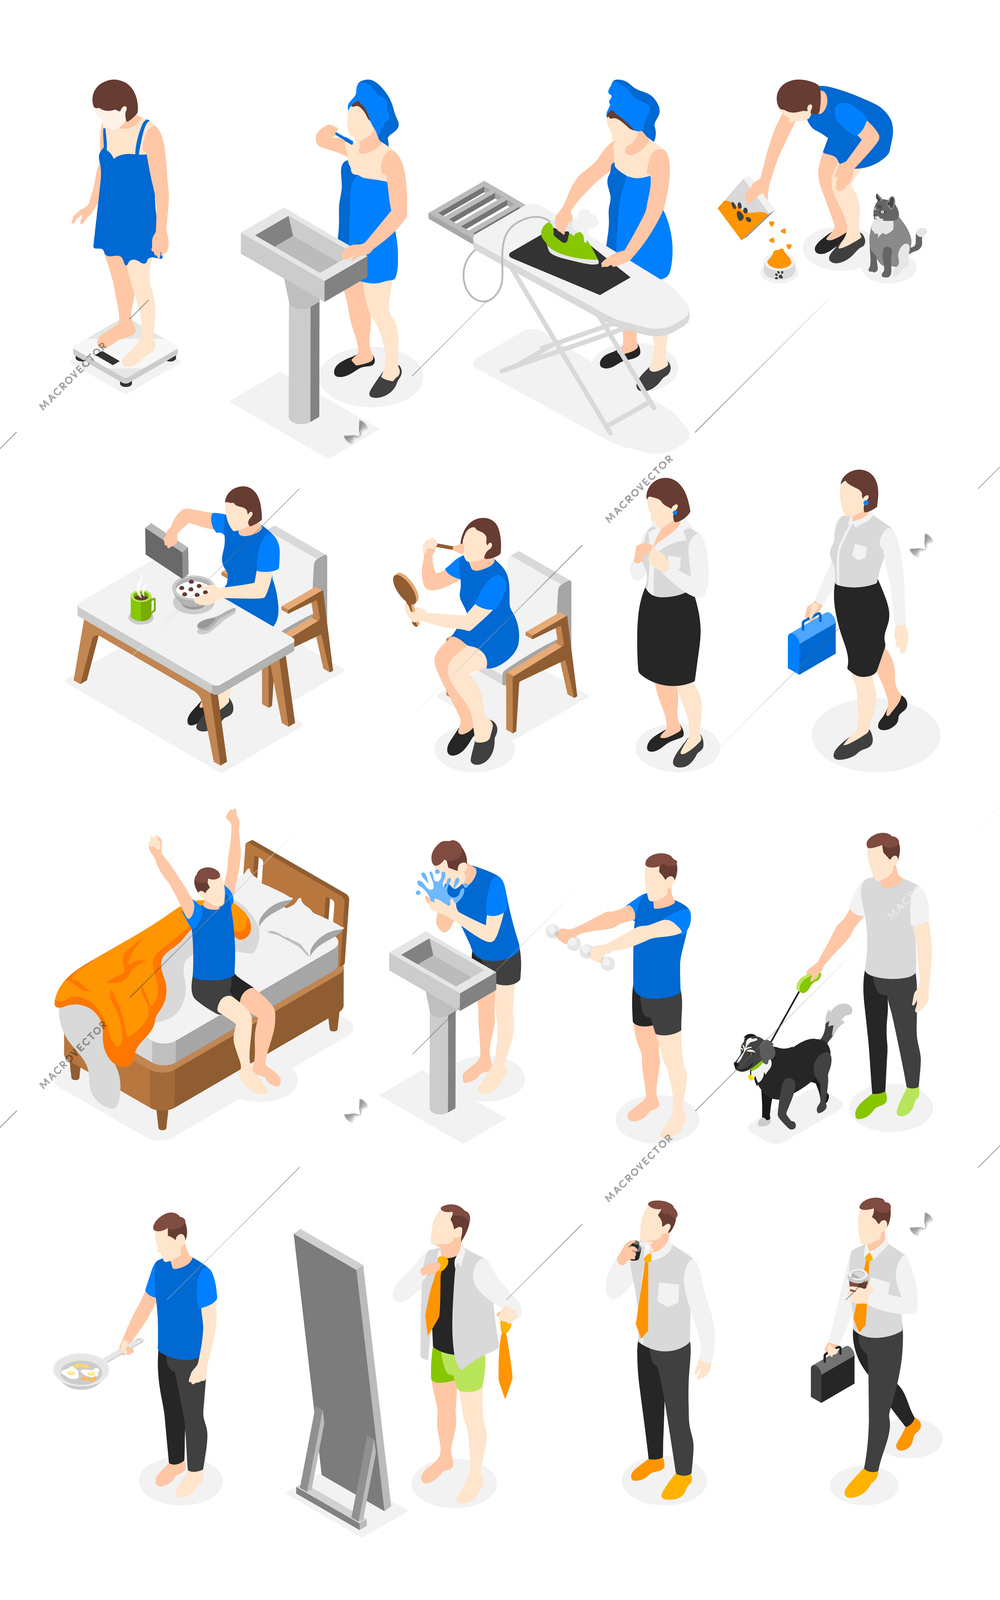 People morning routine isometric icons set with man and woman doing daily rituals isometric vector illustration